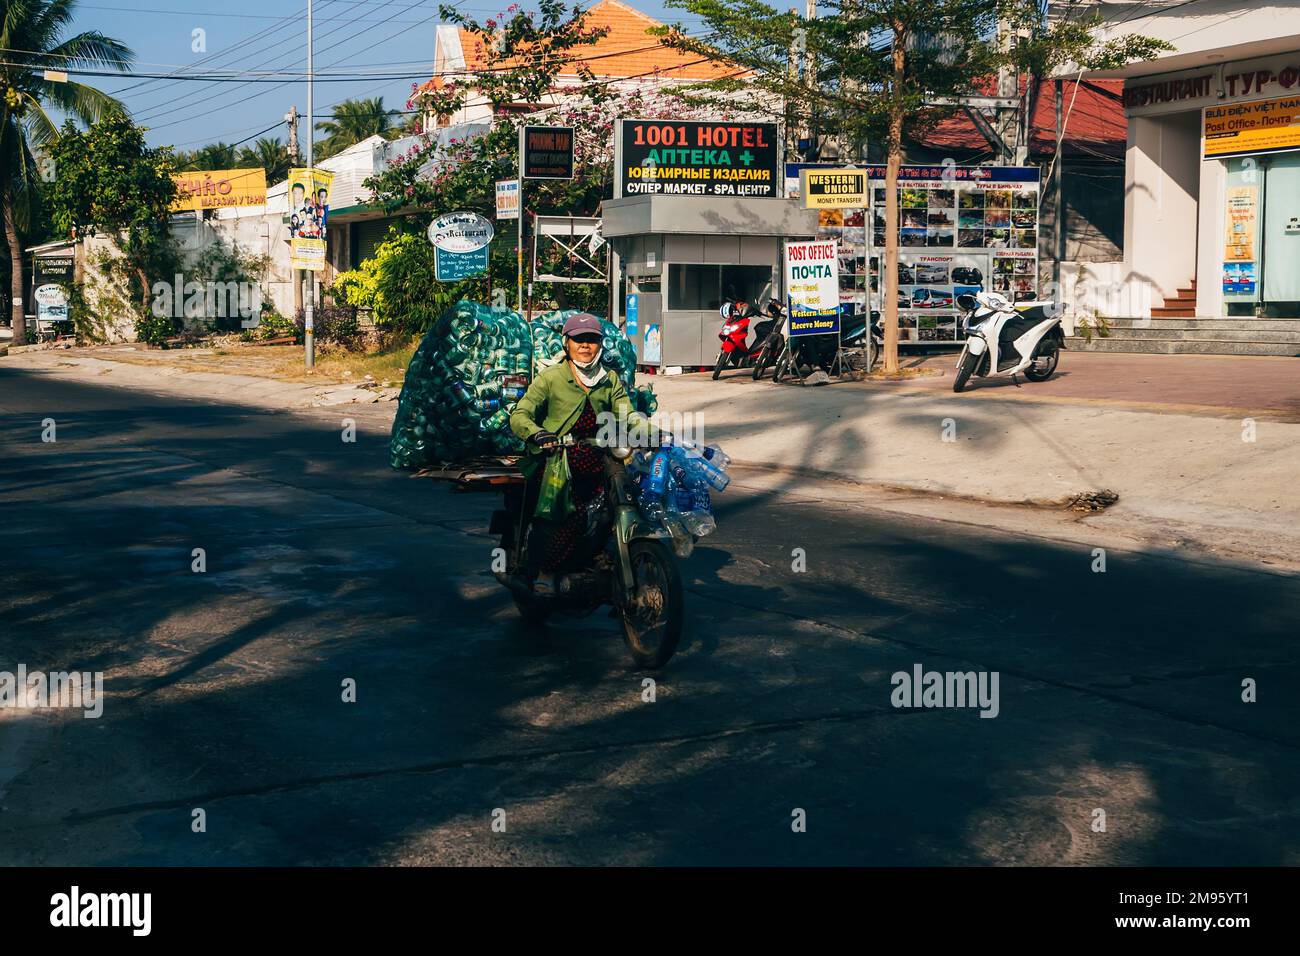 MUI NE, VIETNAM - CIRCA MARCH 2017: Elderly woman riding a motorbike and carries empty bottles of beer and water Stock Photo